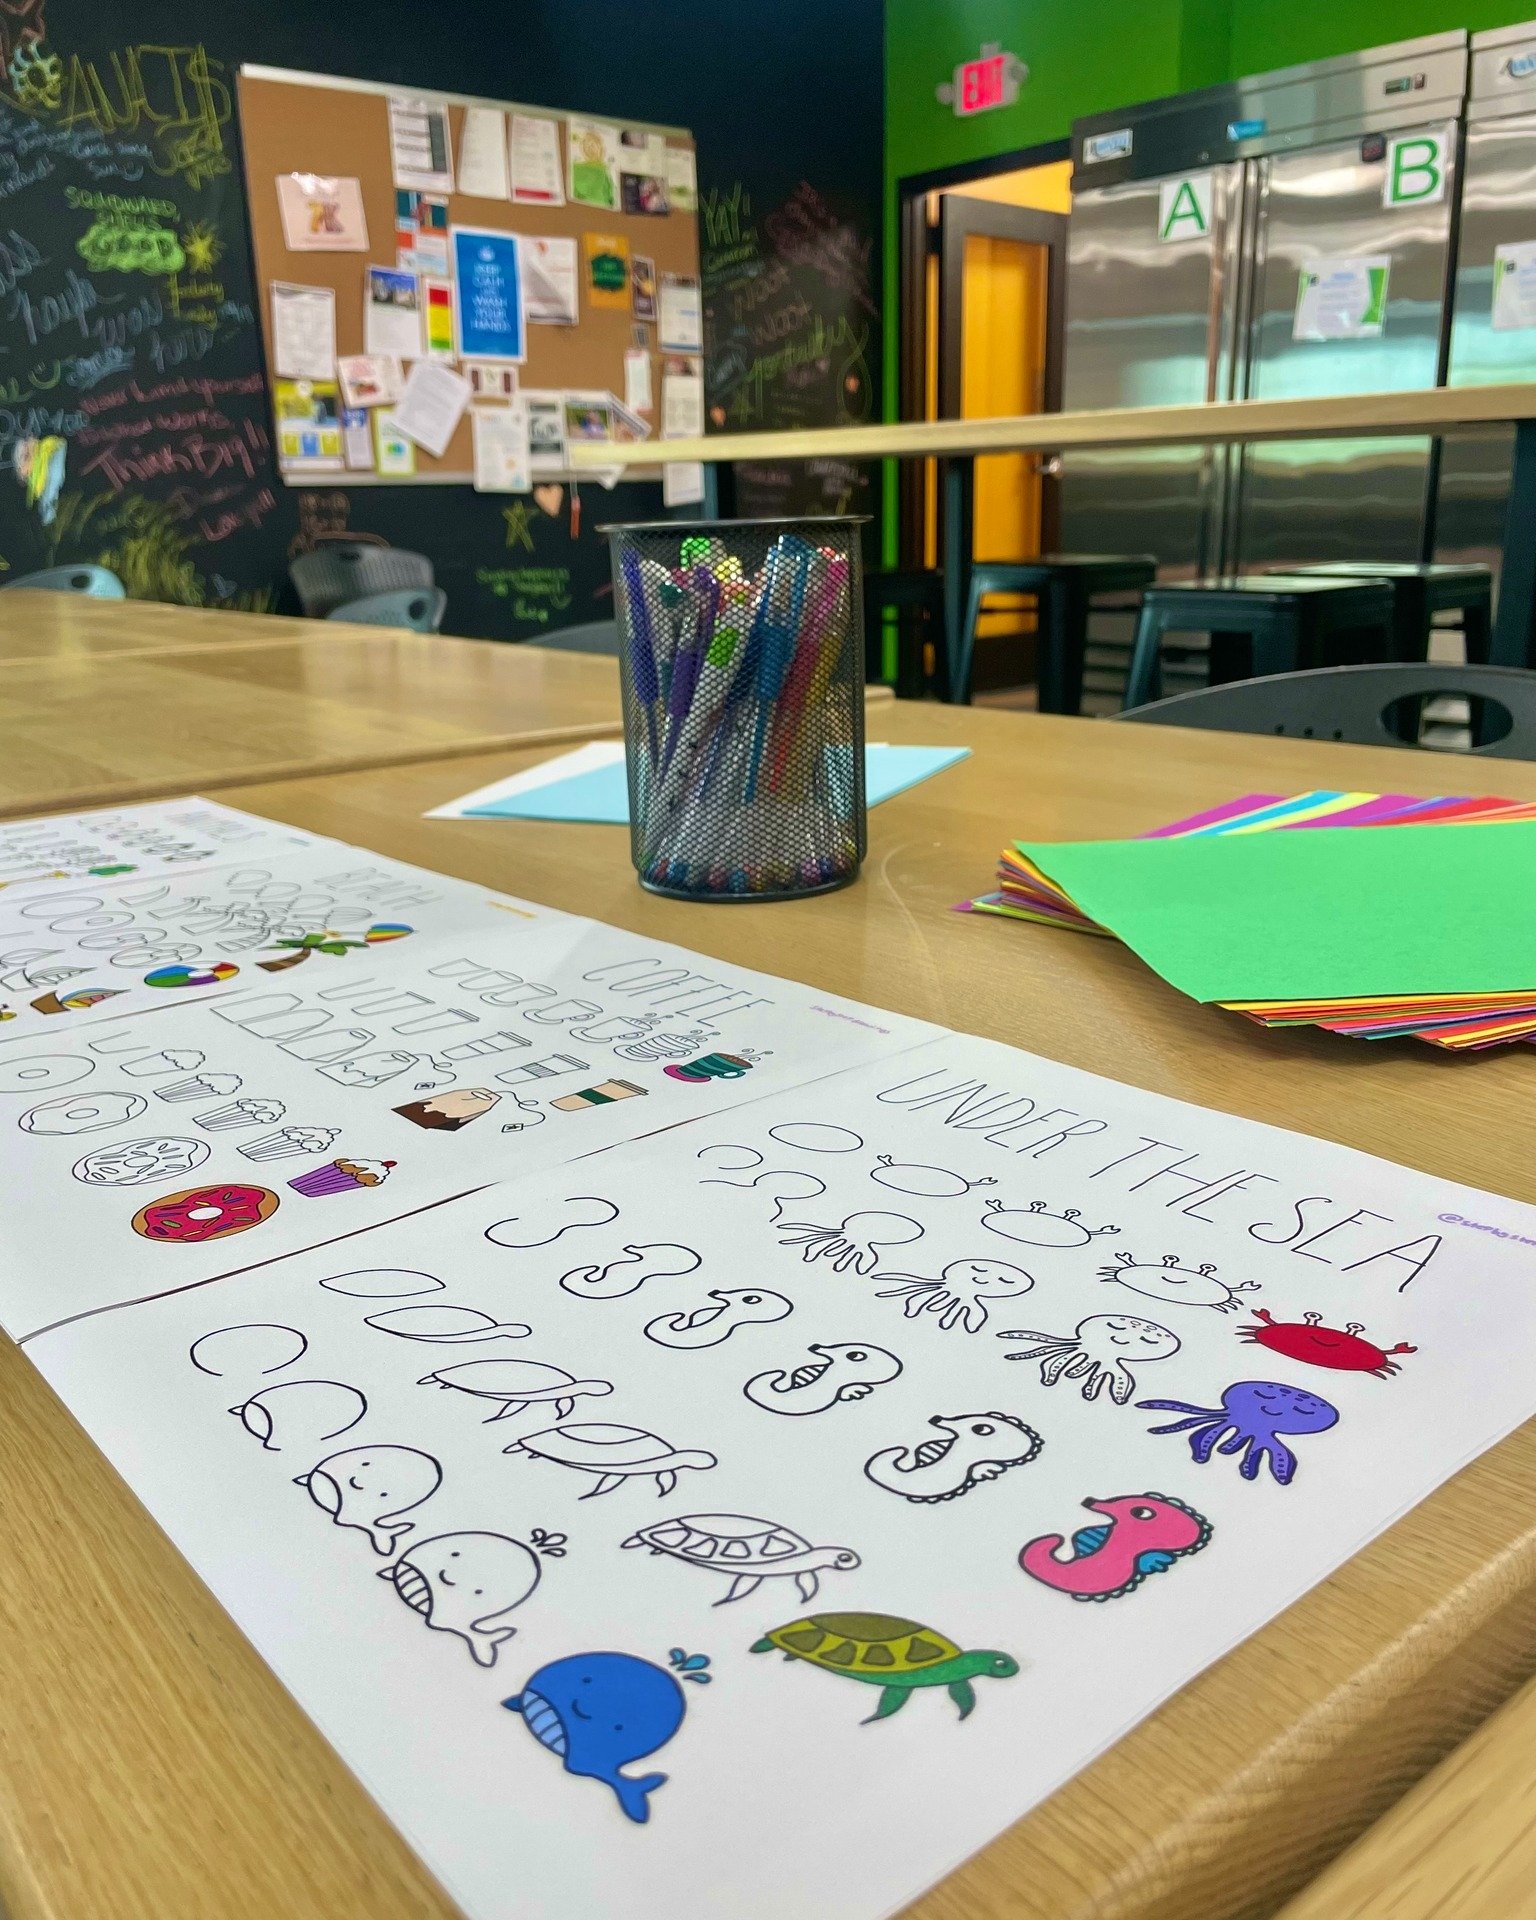 🎨 Happy International Doodle Day! 🖊️ 

Today, our Fortuity team unleashed our creative side by indulging in some freehand doodling and following some step-by-step drawing guides!  It was a blast to see everyone's unique artistic expressions come to